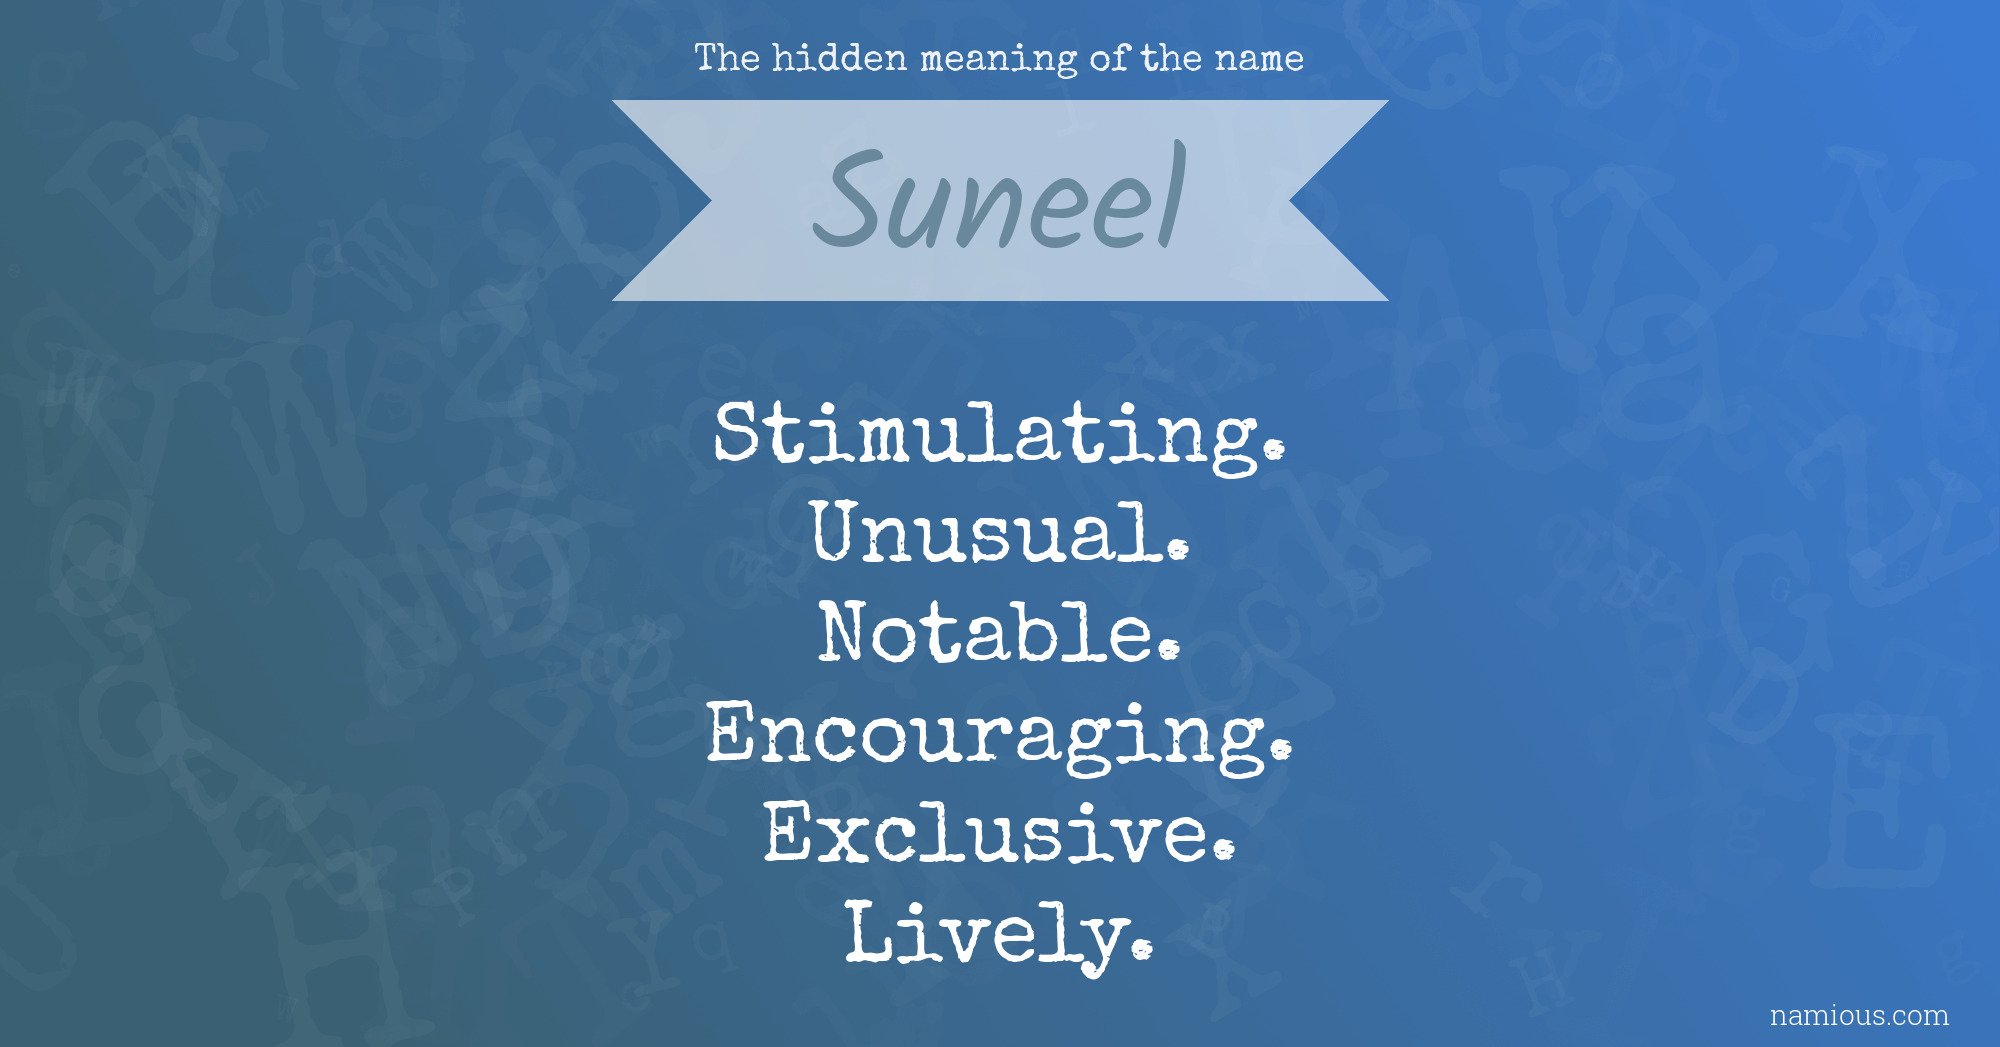 The hidden meaning of the name Suneel